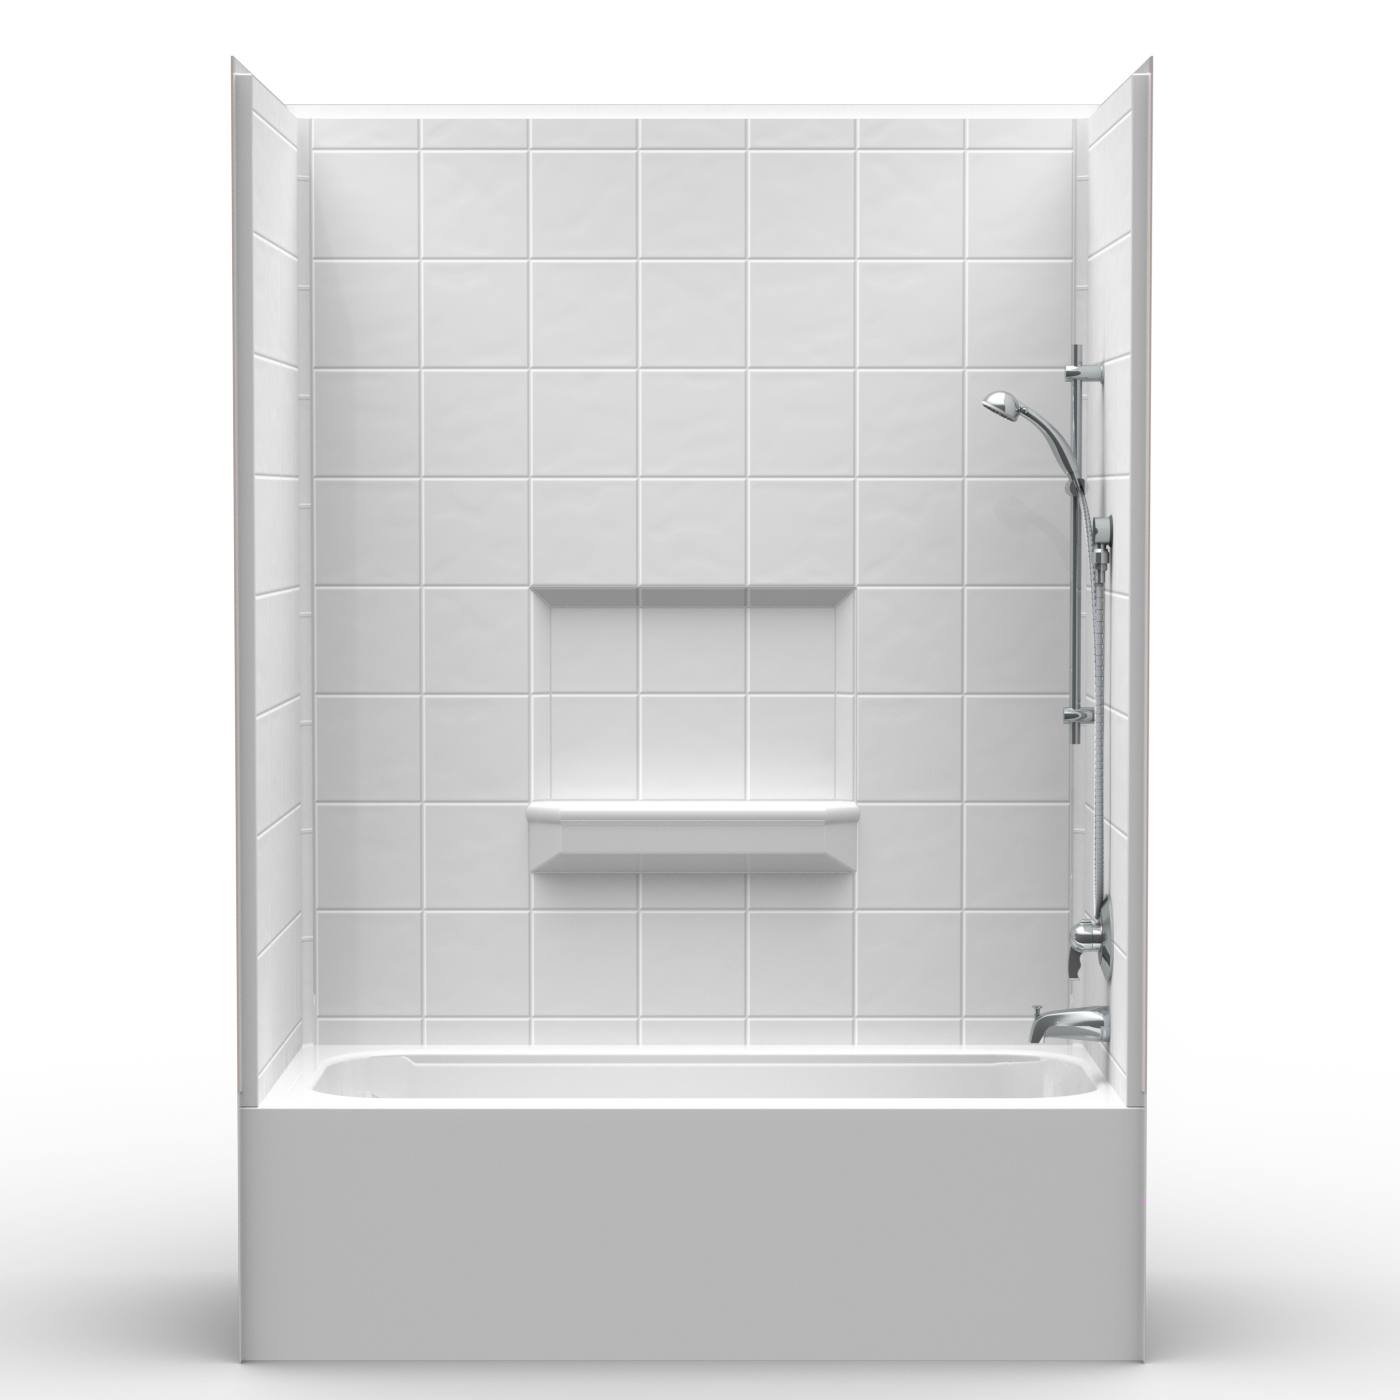 60 X 30 85 Tub Shower Combo, One Piece Tub And Surround Unit